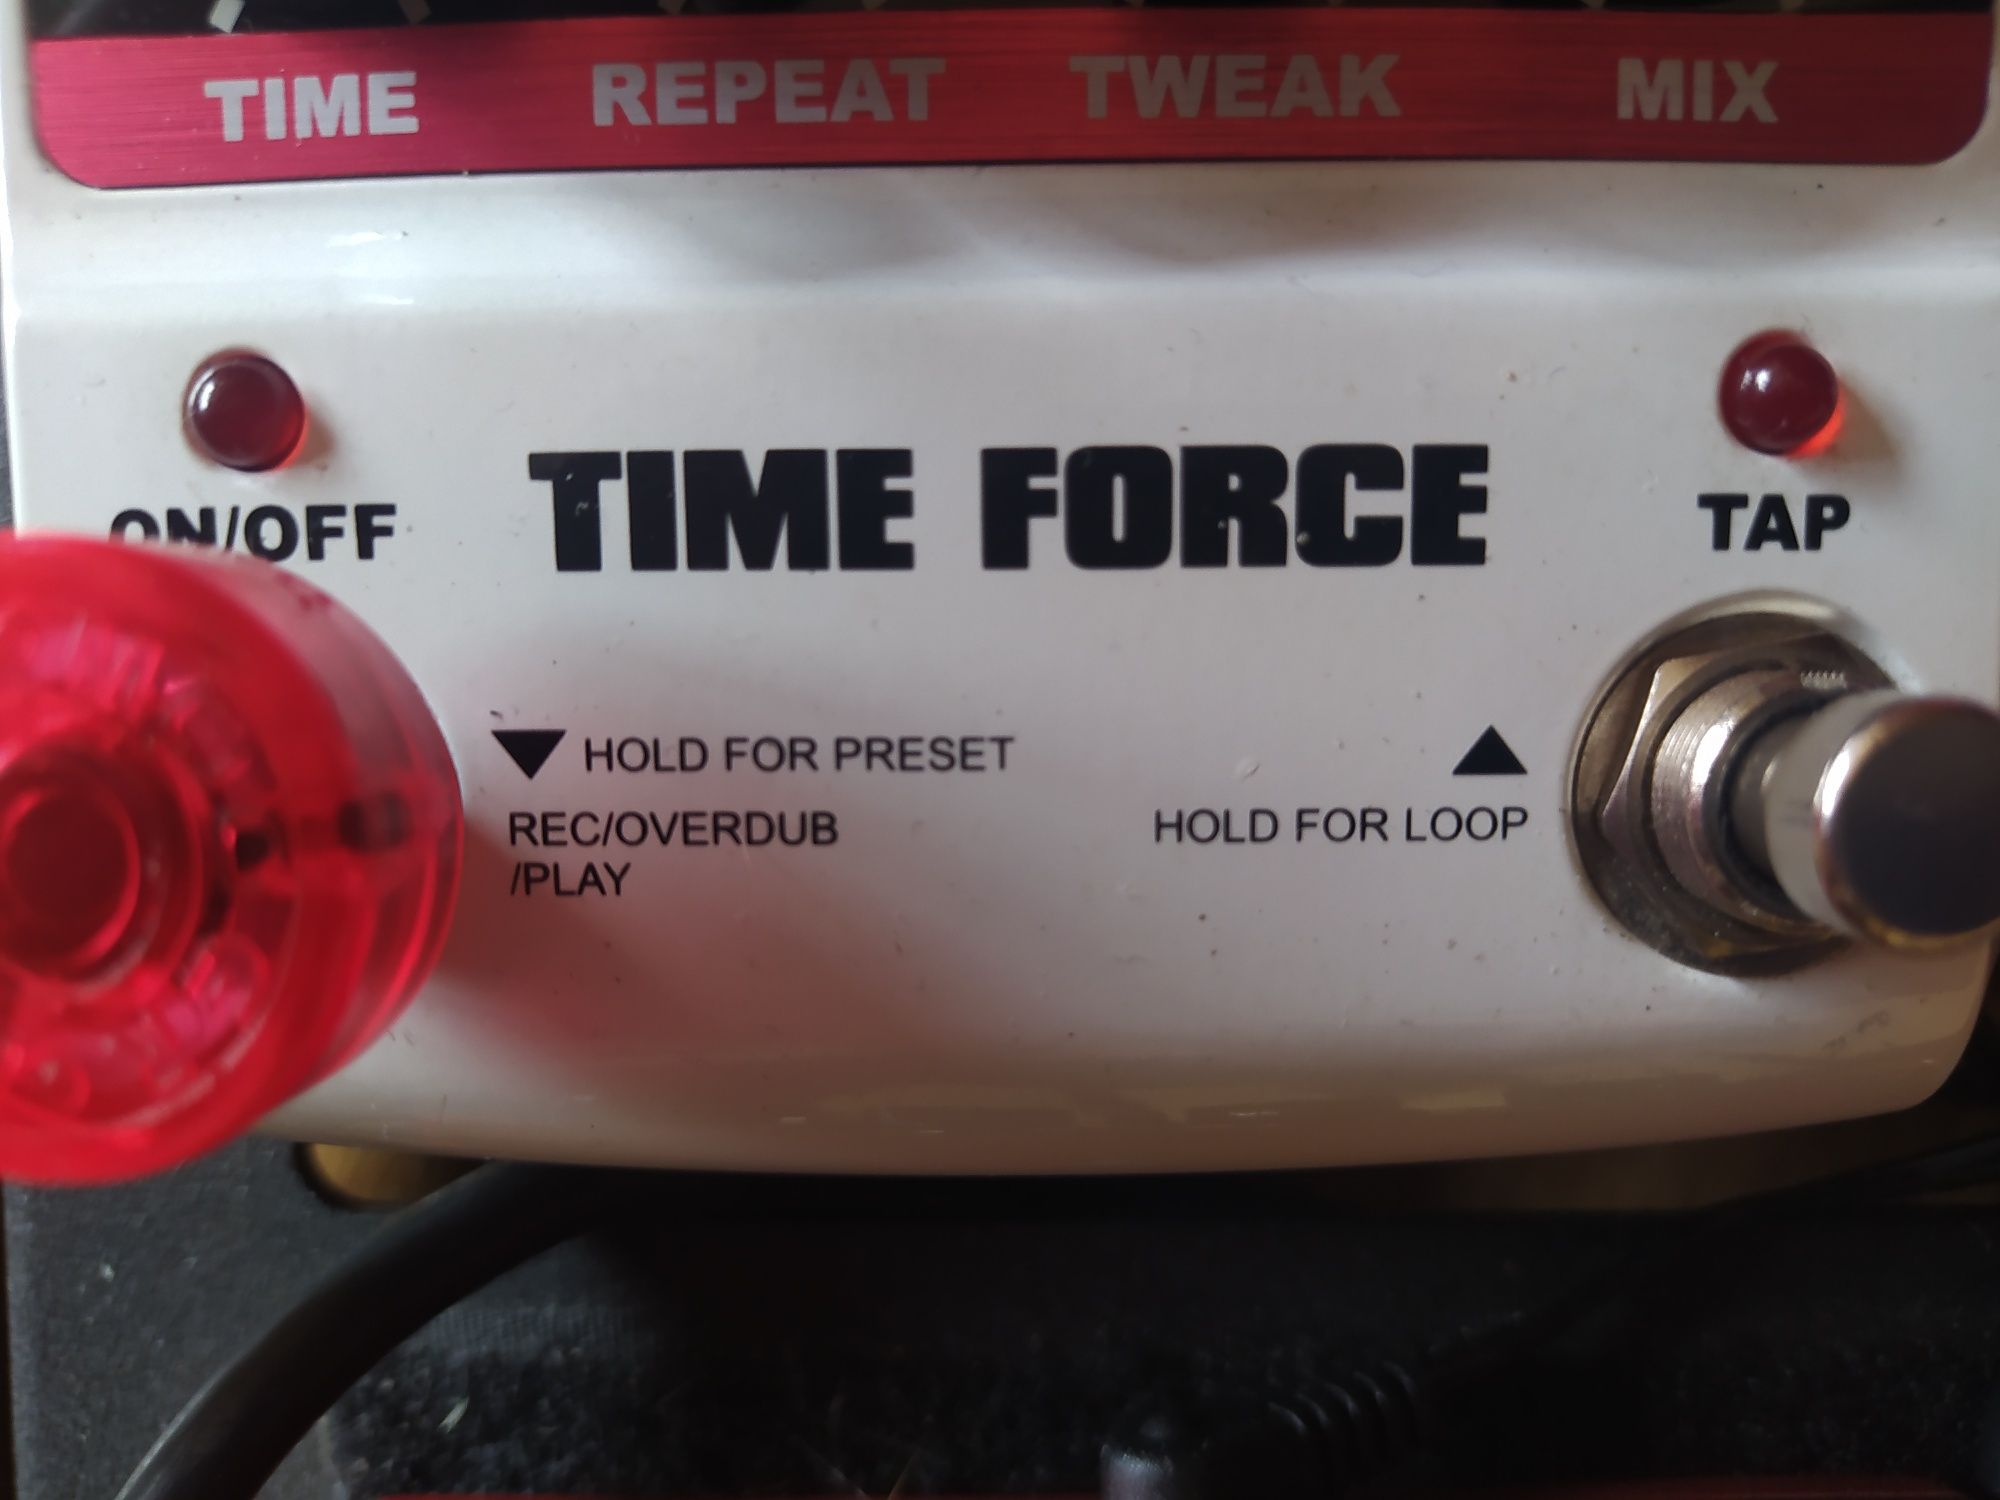 NUX Time Force Delay